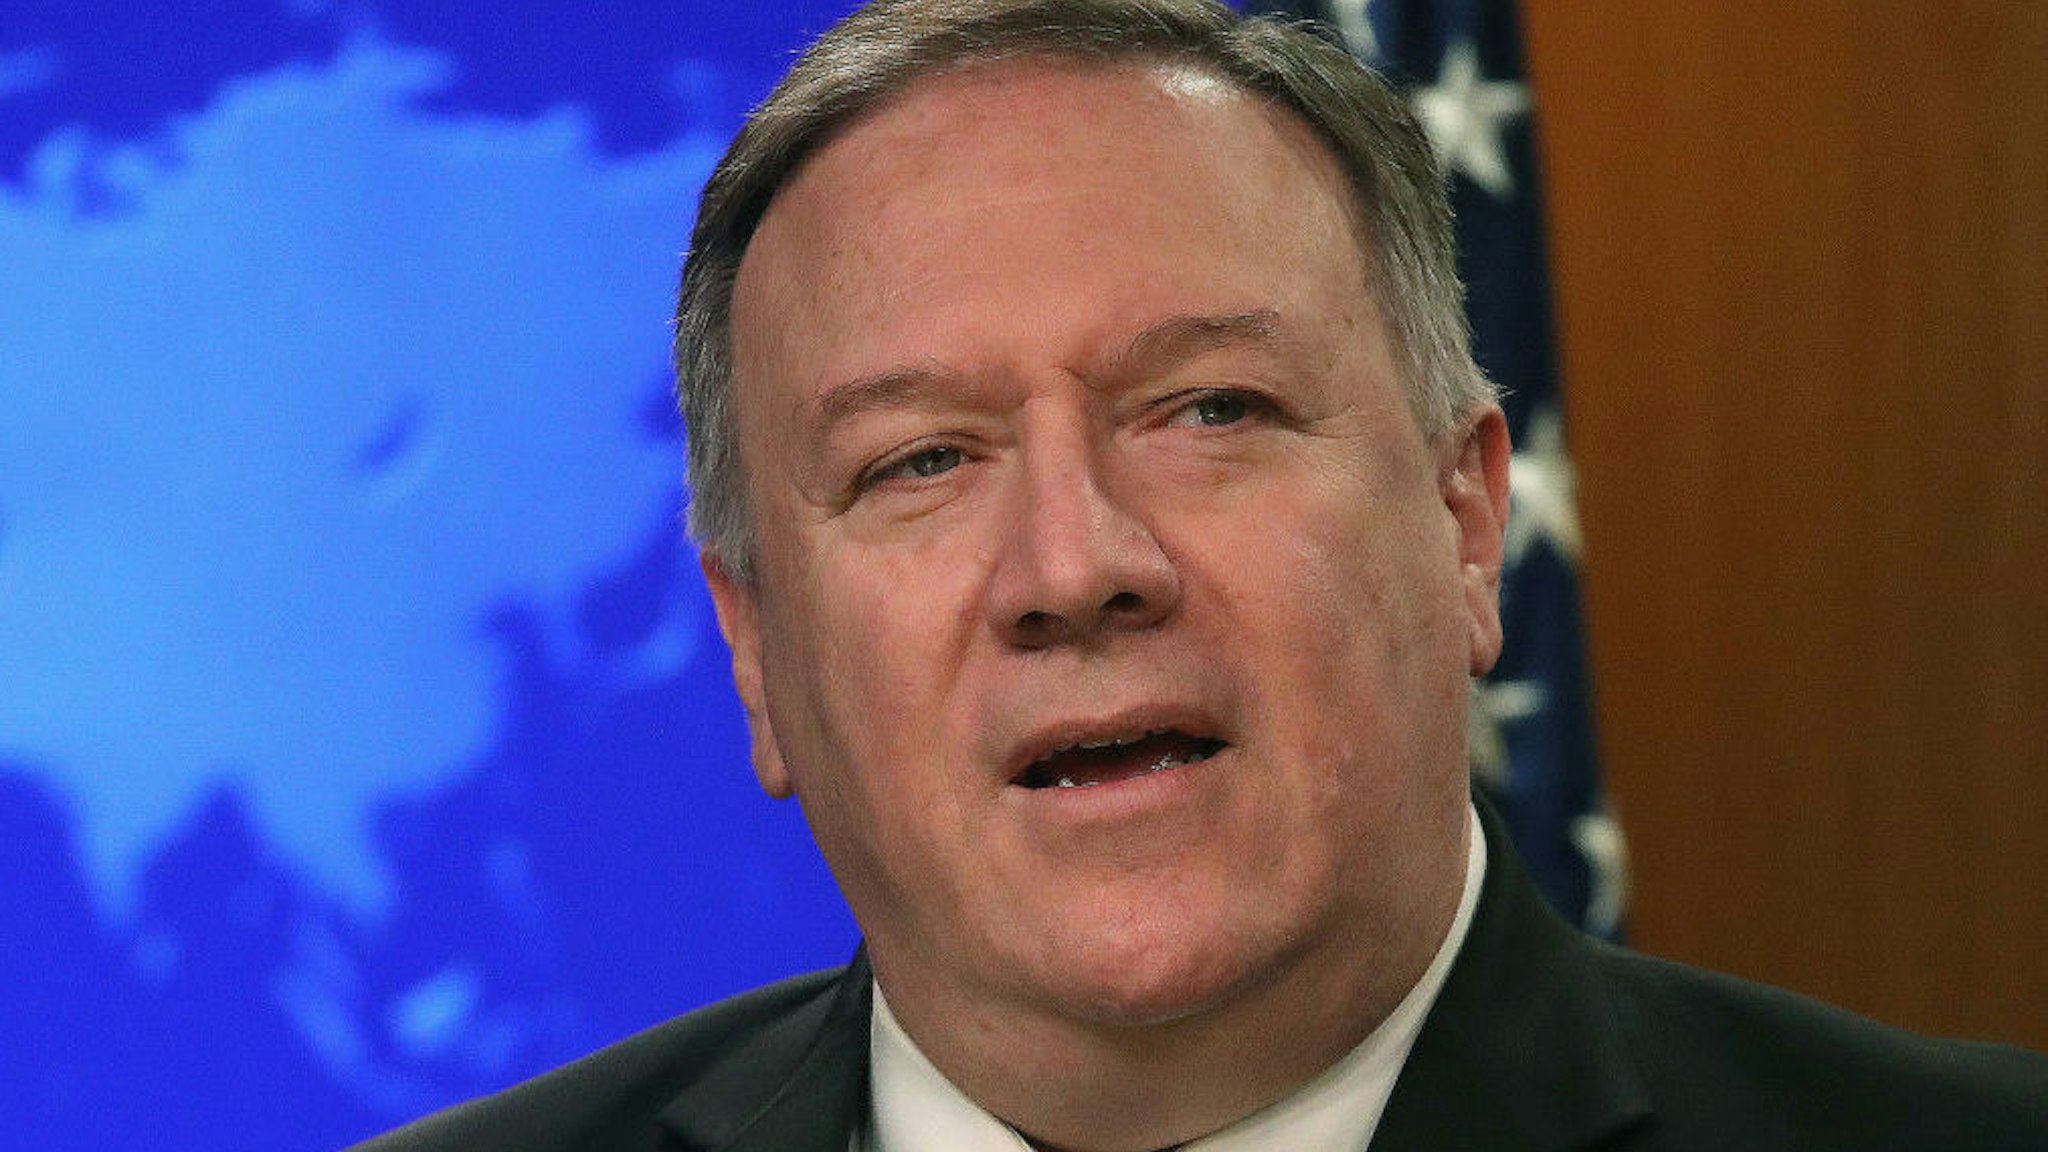 U.S. Secretary of State Mike Pompeo speaks during a briefing at the State Department on February 5, 2020 in Washington, DC.